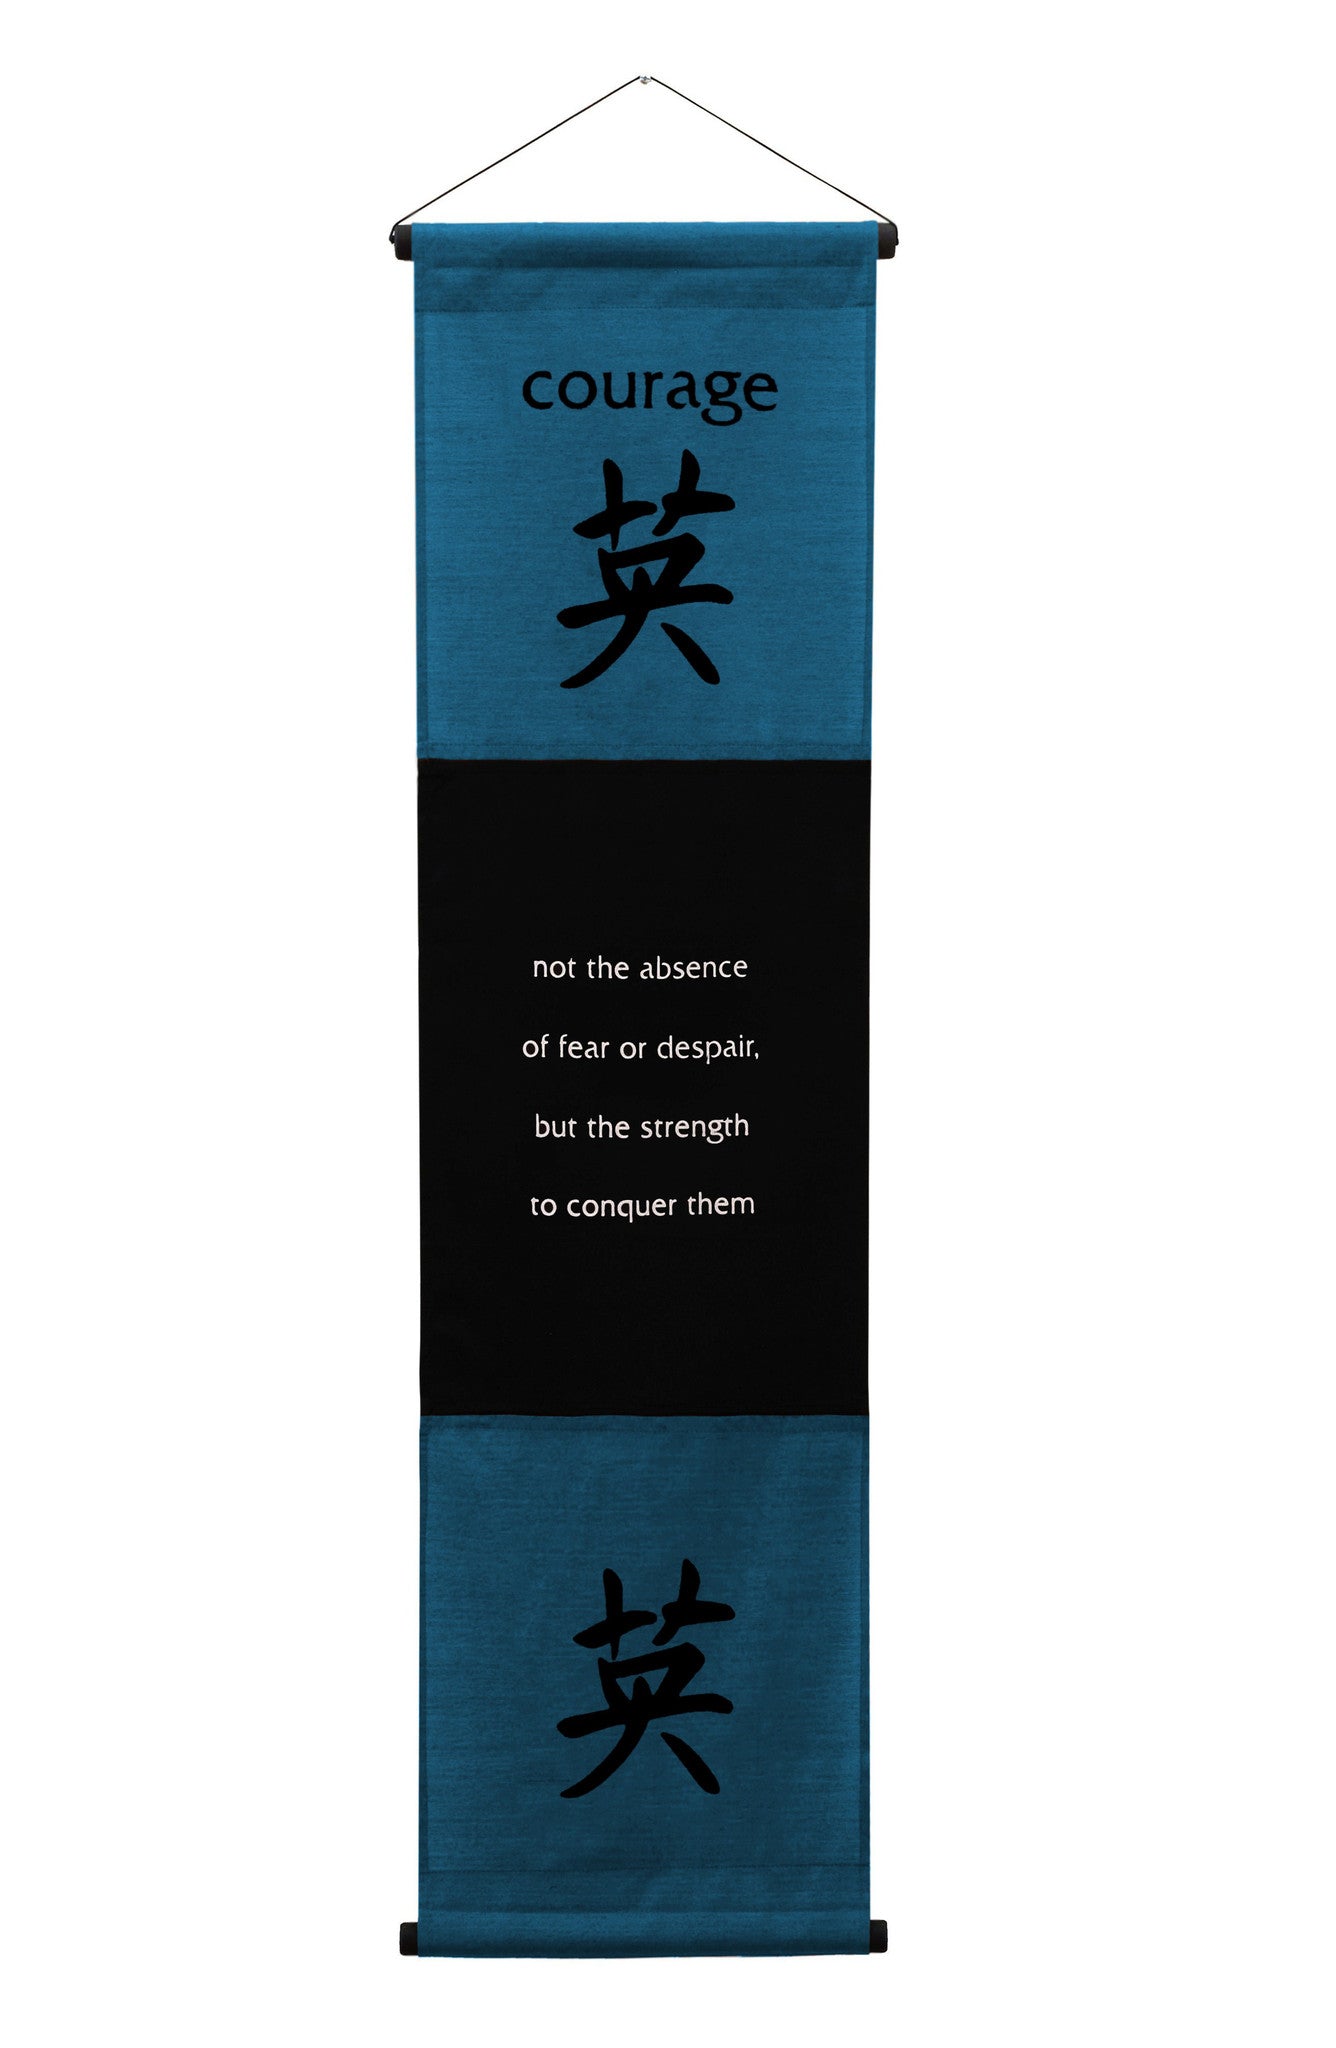 Inspirational Wall Decor "Courage" Banner Large, Inspiring Quote Wall Hanging Scroll, Affirmation Motivational Uplifting Art Decoration, Thought Saying Tapestry blue